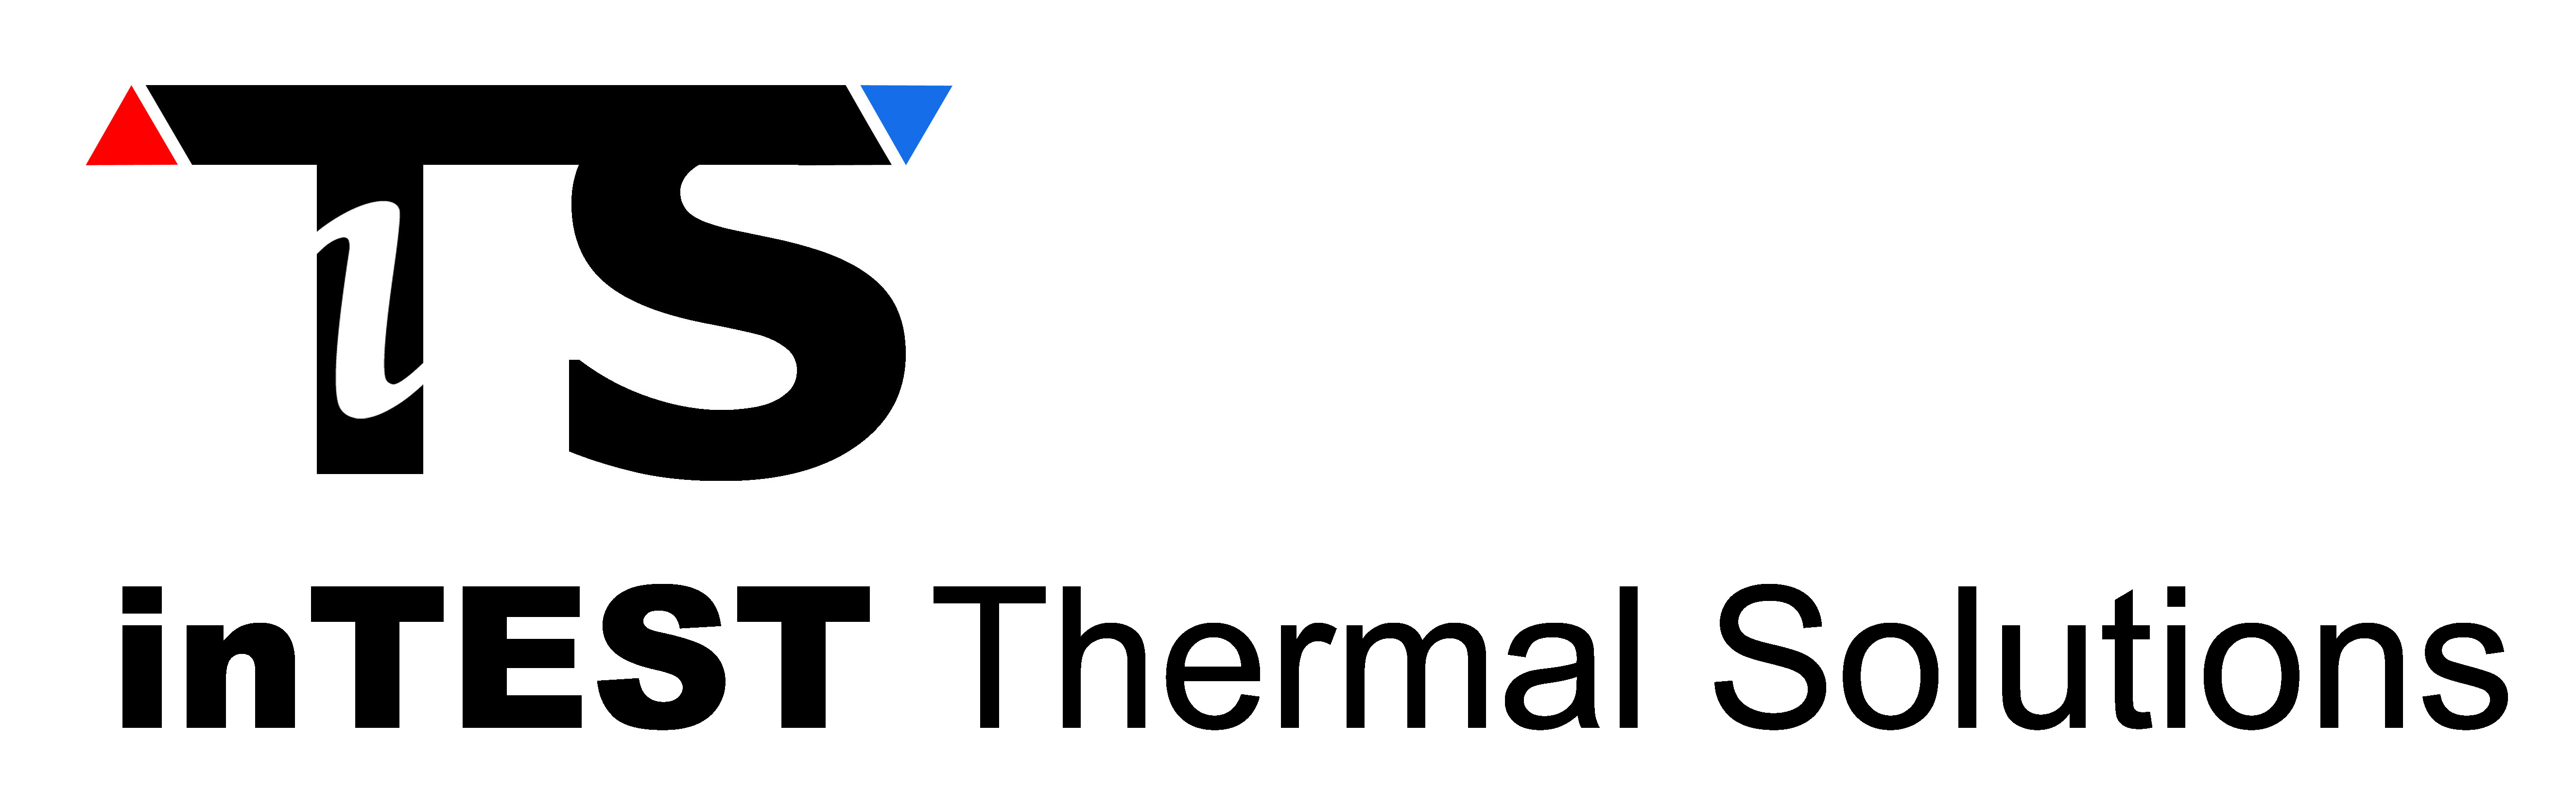 iTS_inTESTthermalSolutions